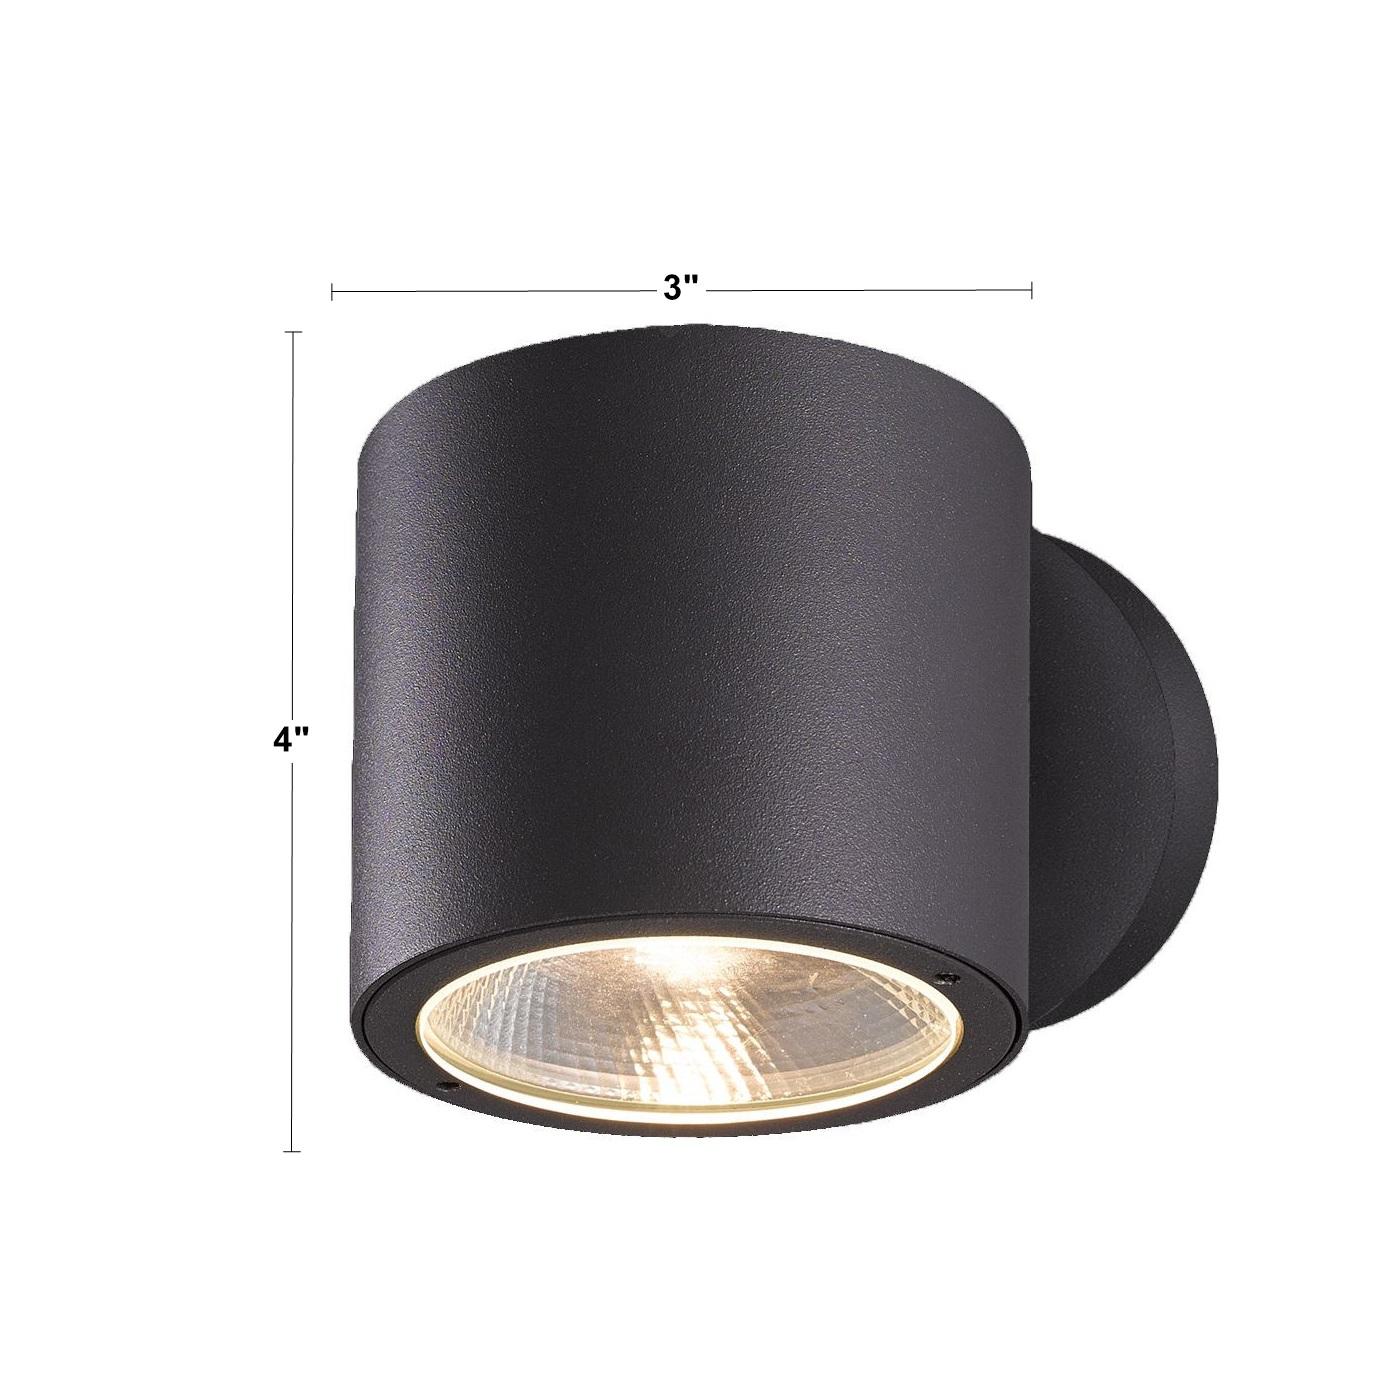 Volume 4 In 1 Light LED Outdoor Cylinder Wall Light 3000K Gray Finish